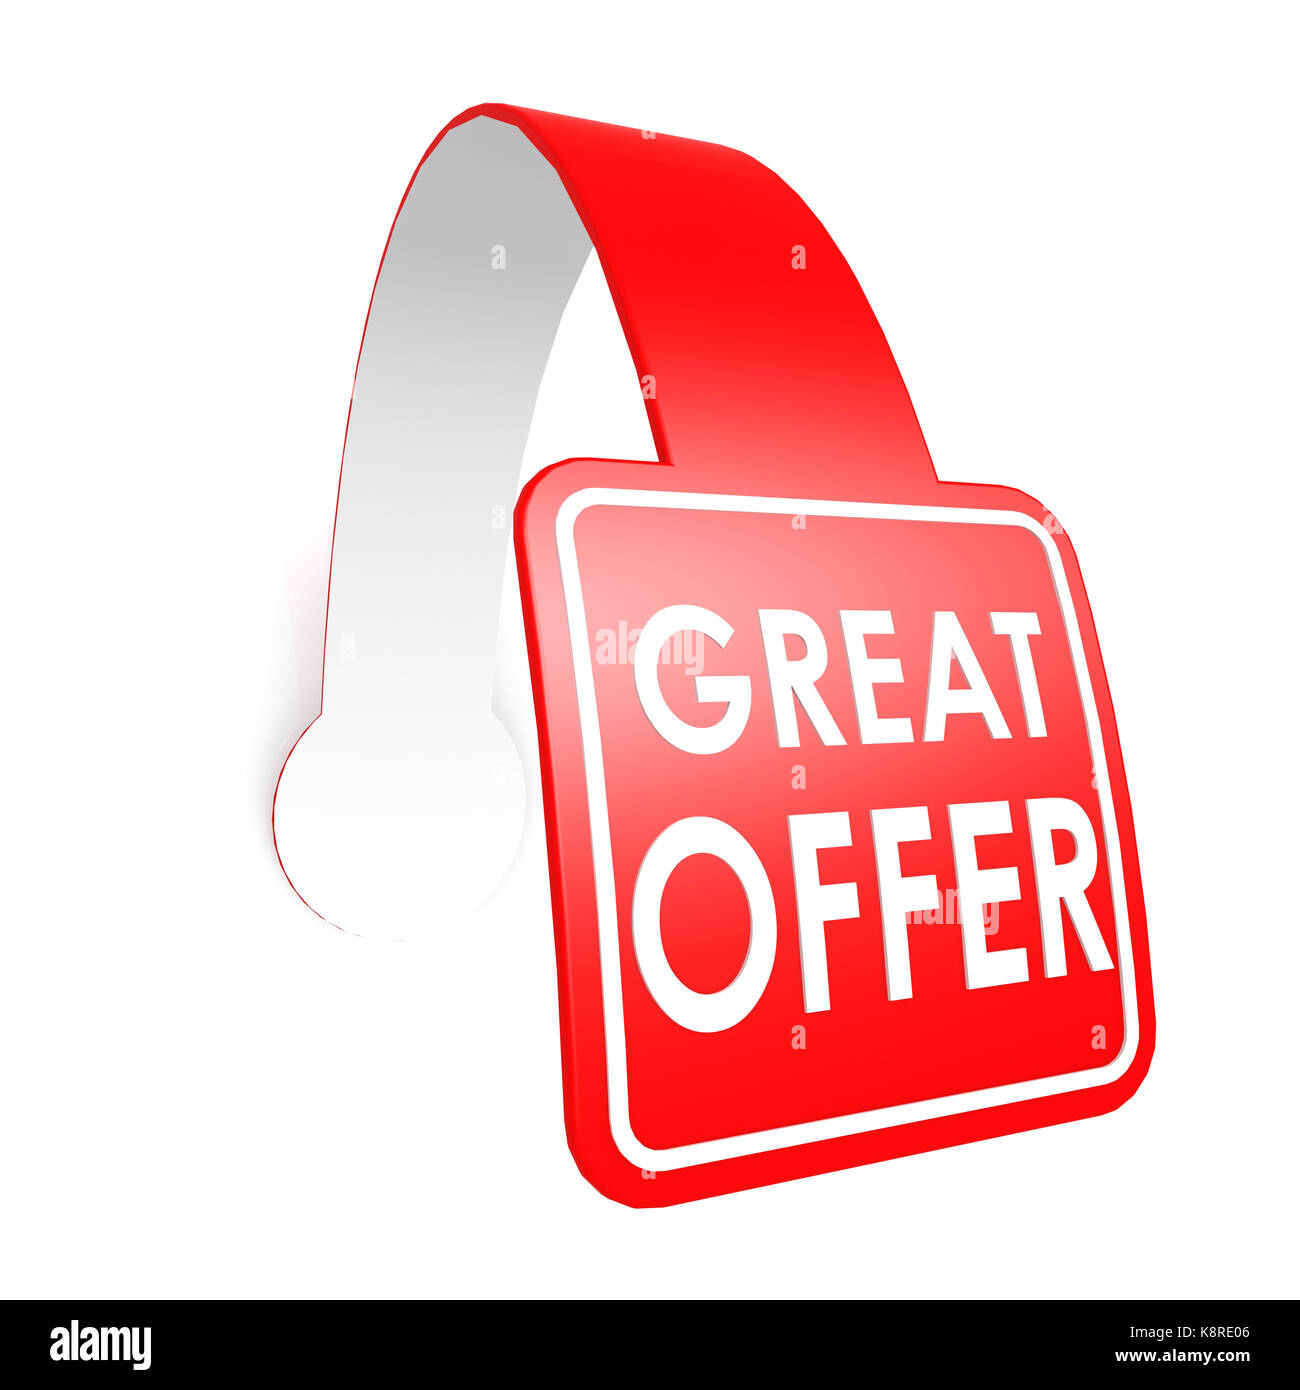 Button with text Deal of the day - stock vector 1178646